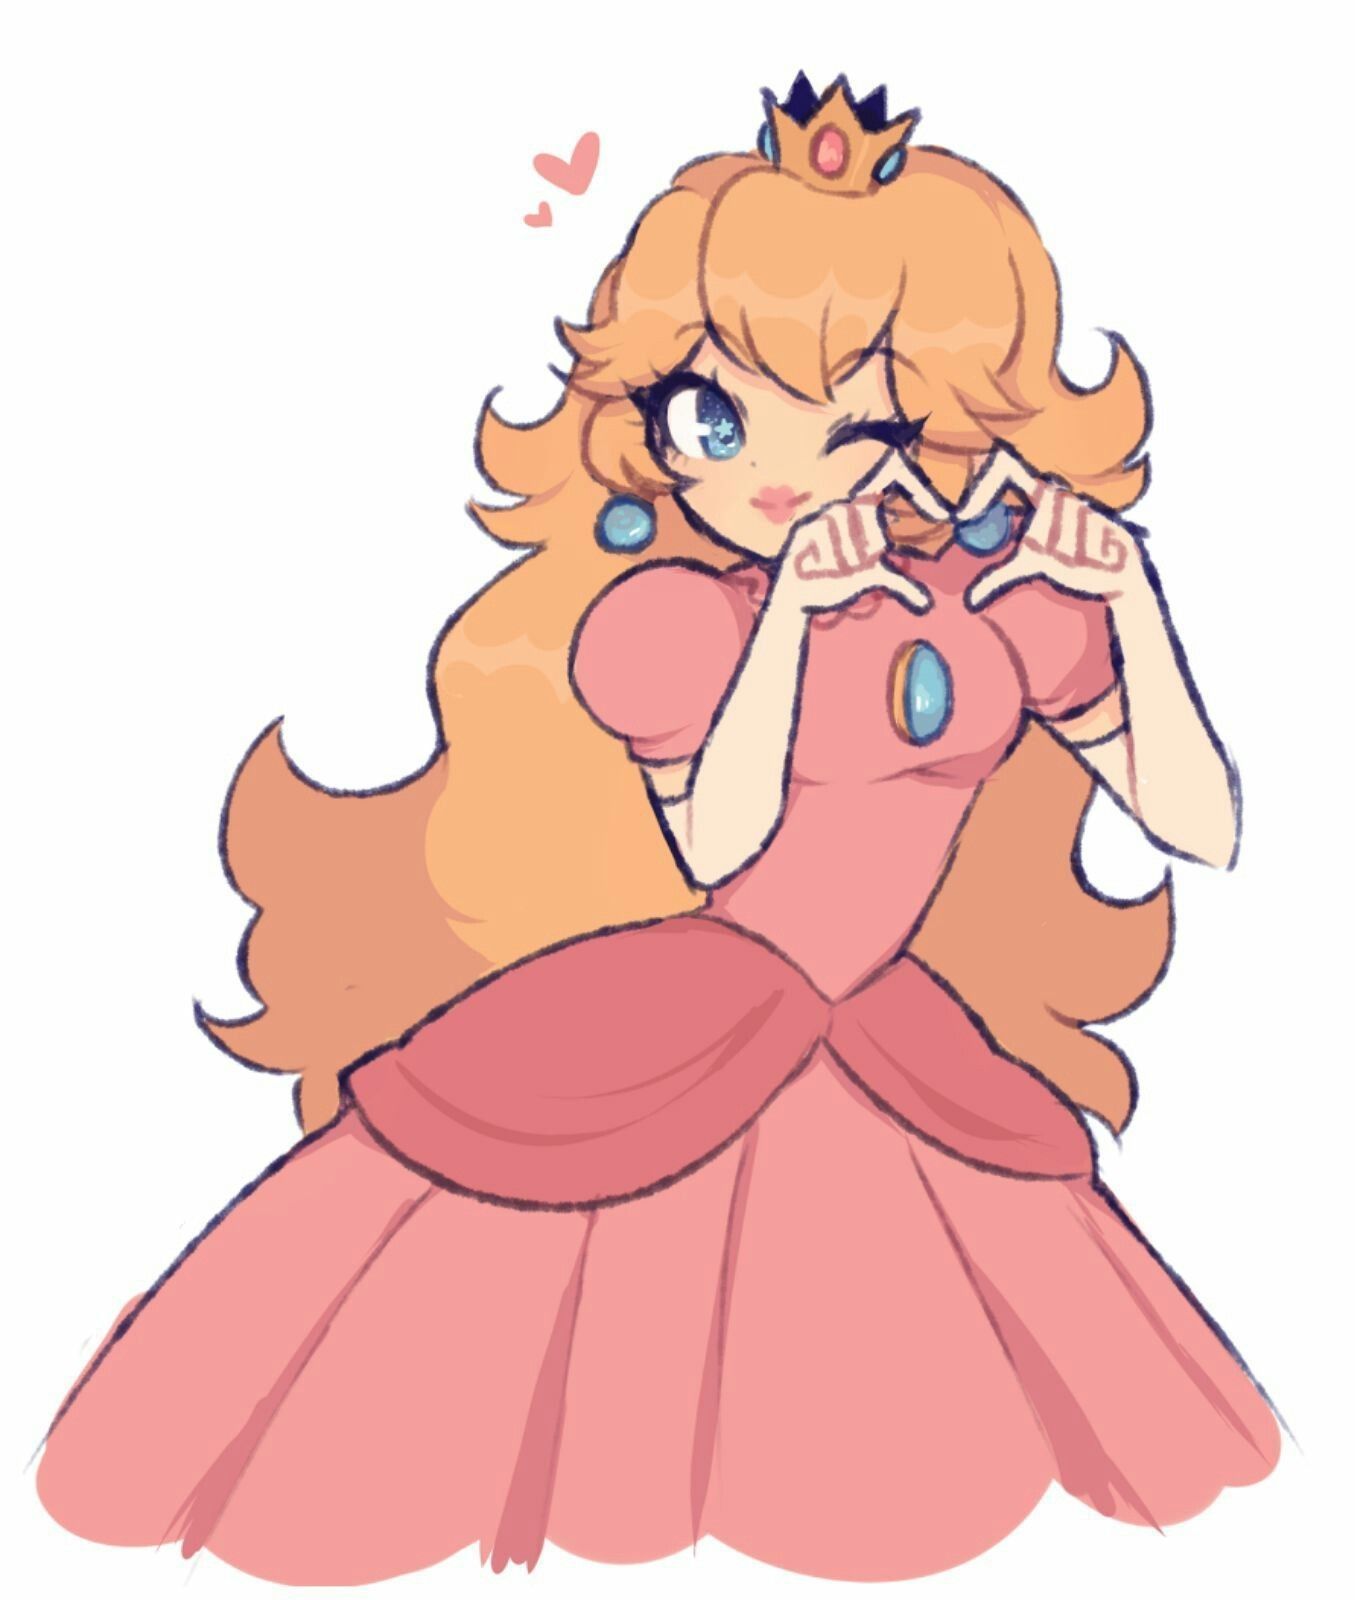 Peach is a character from the Mario franchise. She is the princess of the Mushroom Kingdom and the damsel in distress of the series. She is known for her pink dress, blonde hair, and tiara. She is often seen wearing a pink dress and a tiara. - Princess Peach